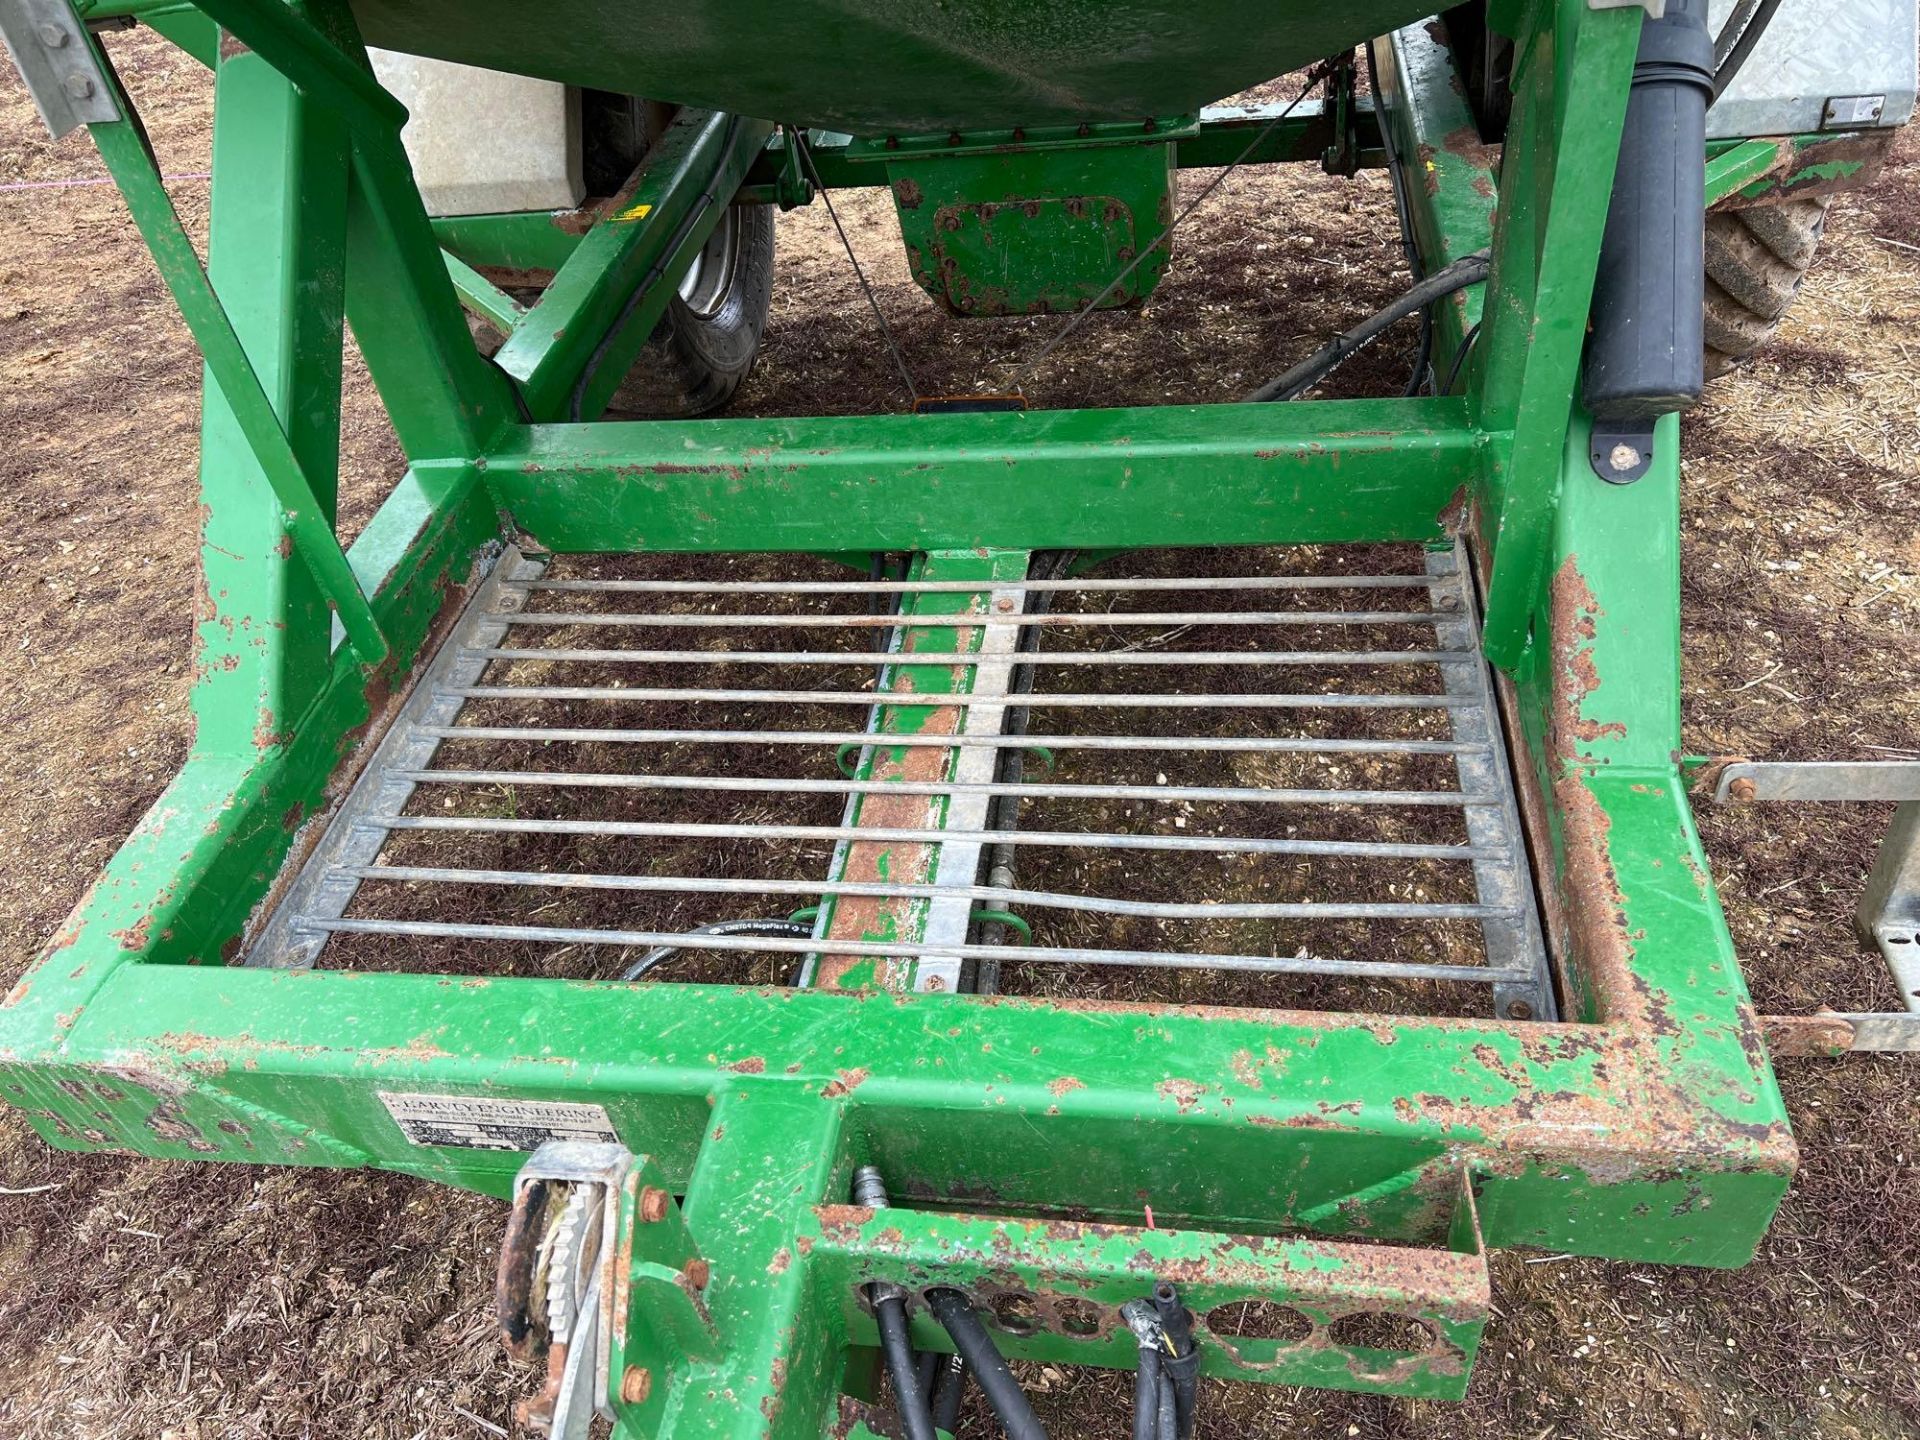 6T feed dispensing trailer (2019) - Image 7 of 8